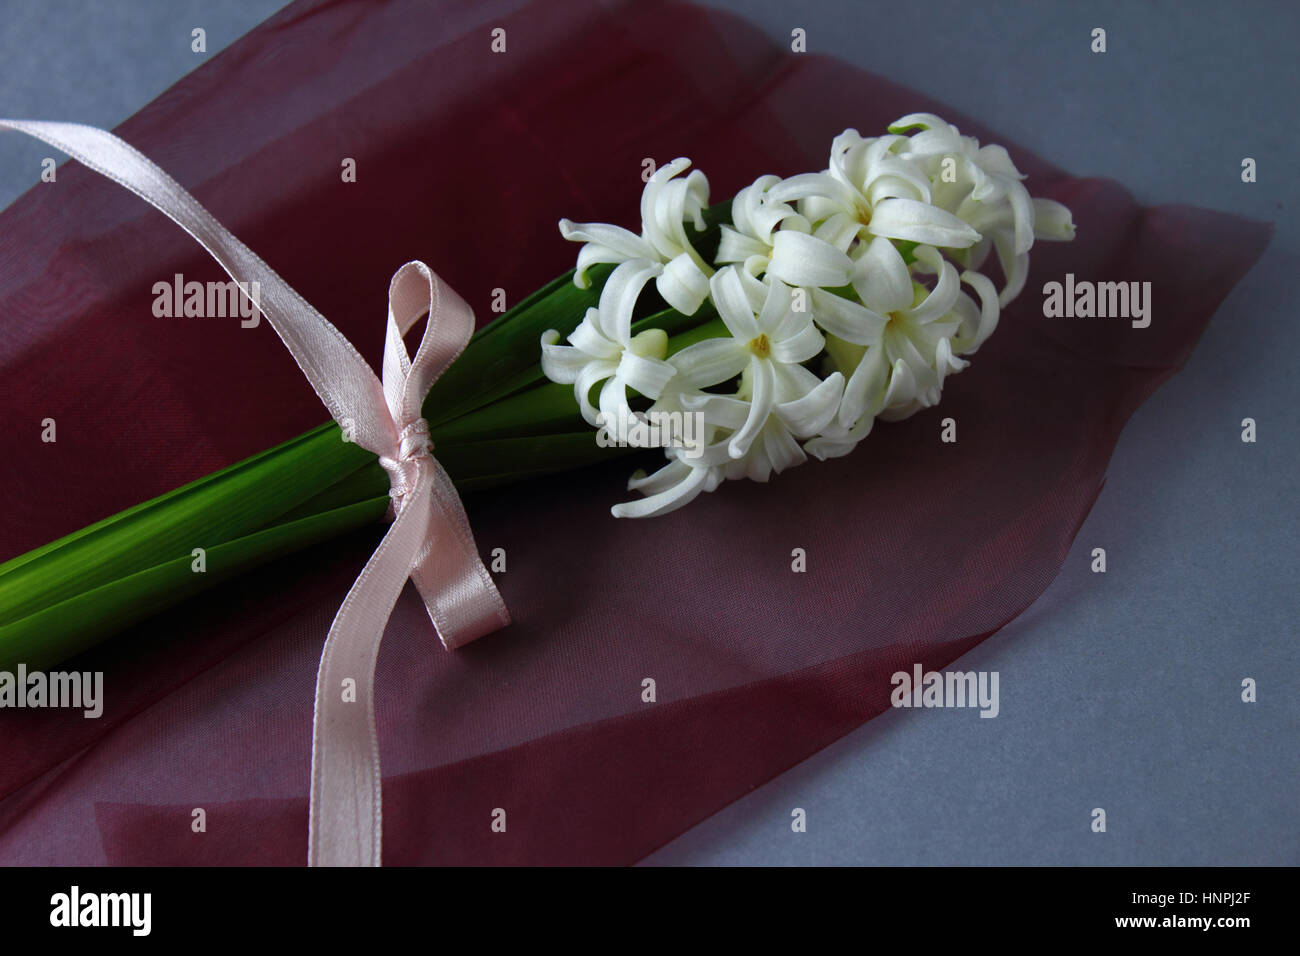 Hyacinth composition Stock Photo